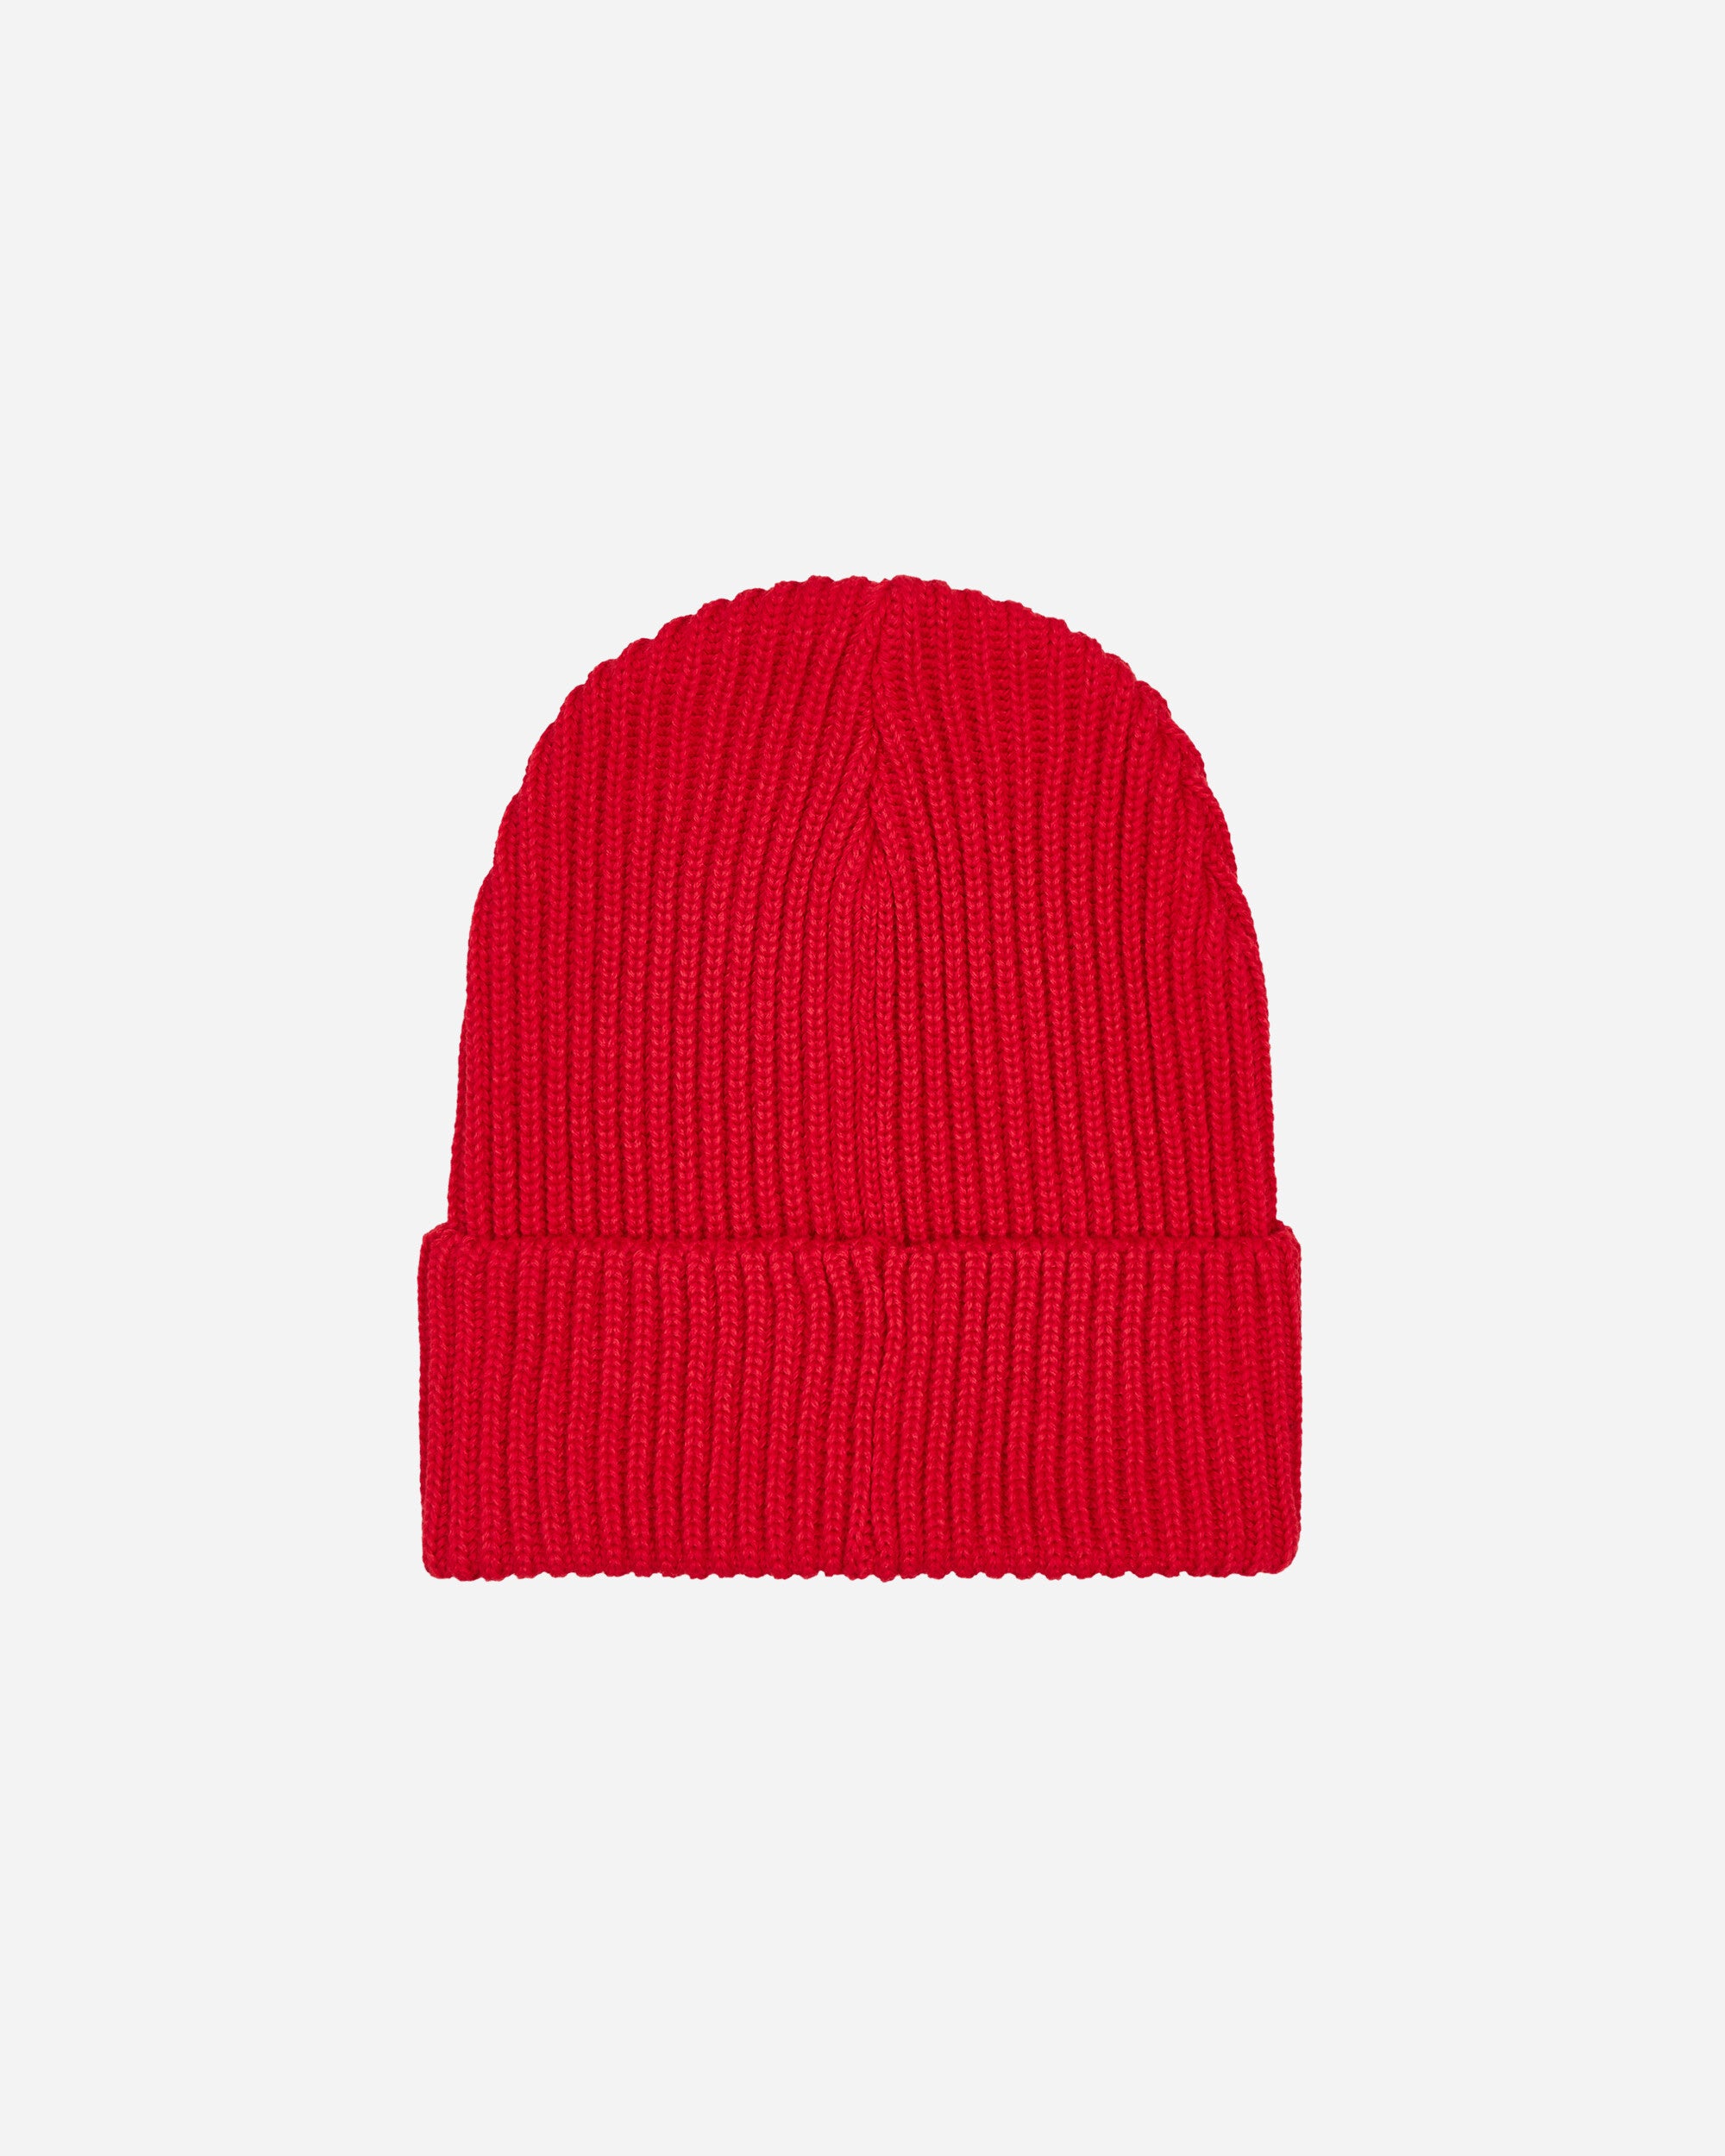 Patagonia Fishermans Rolled Beanie Touring Red Hats Beanies 29105 TGRD